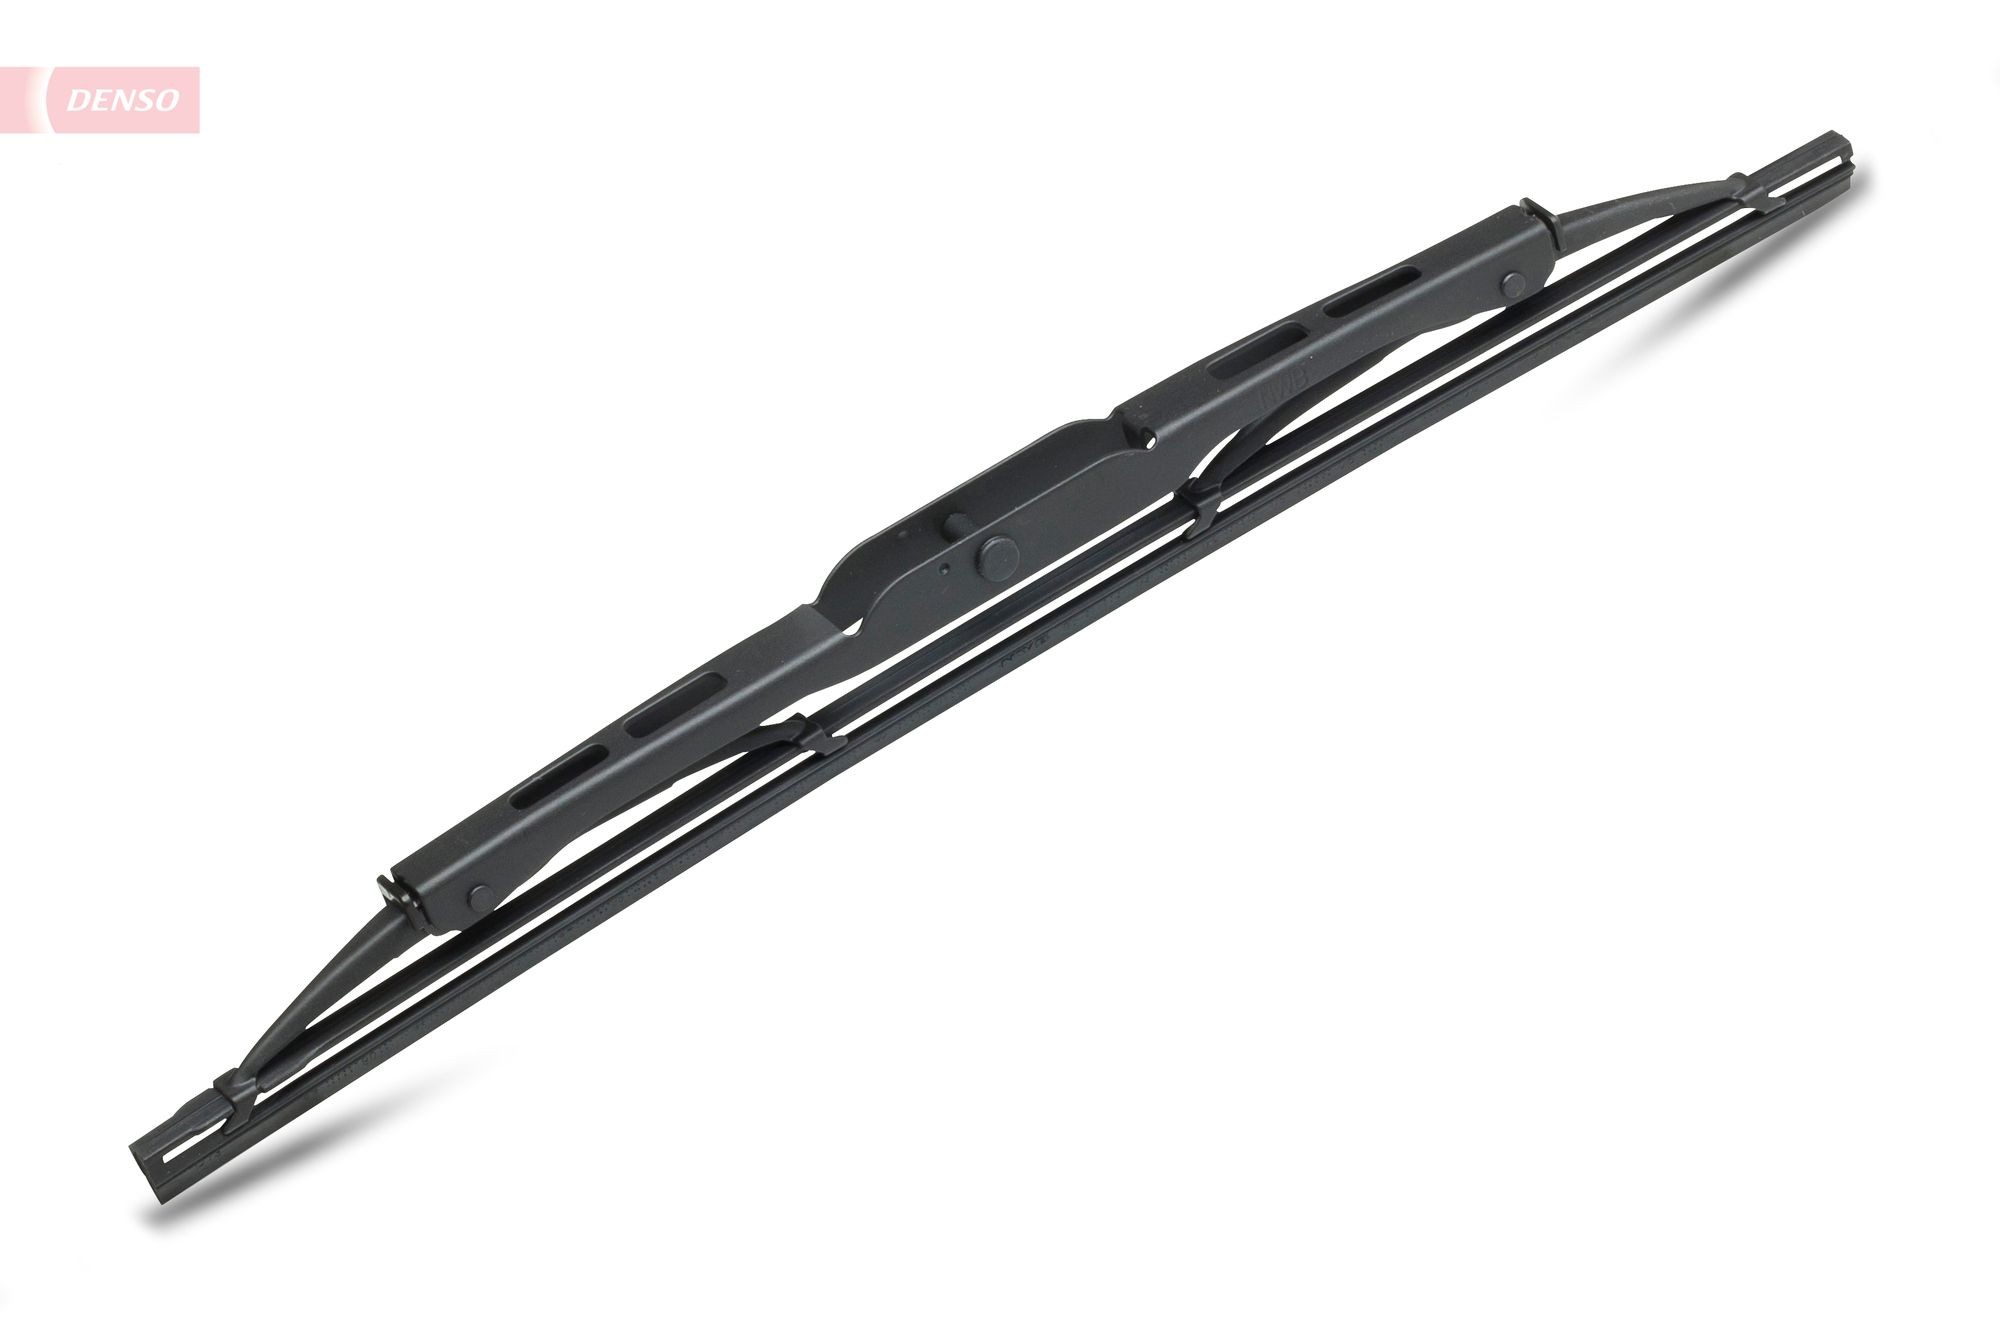 DENSO DM-030 Wiper blade OPEL experience and price